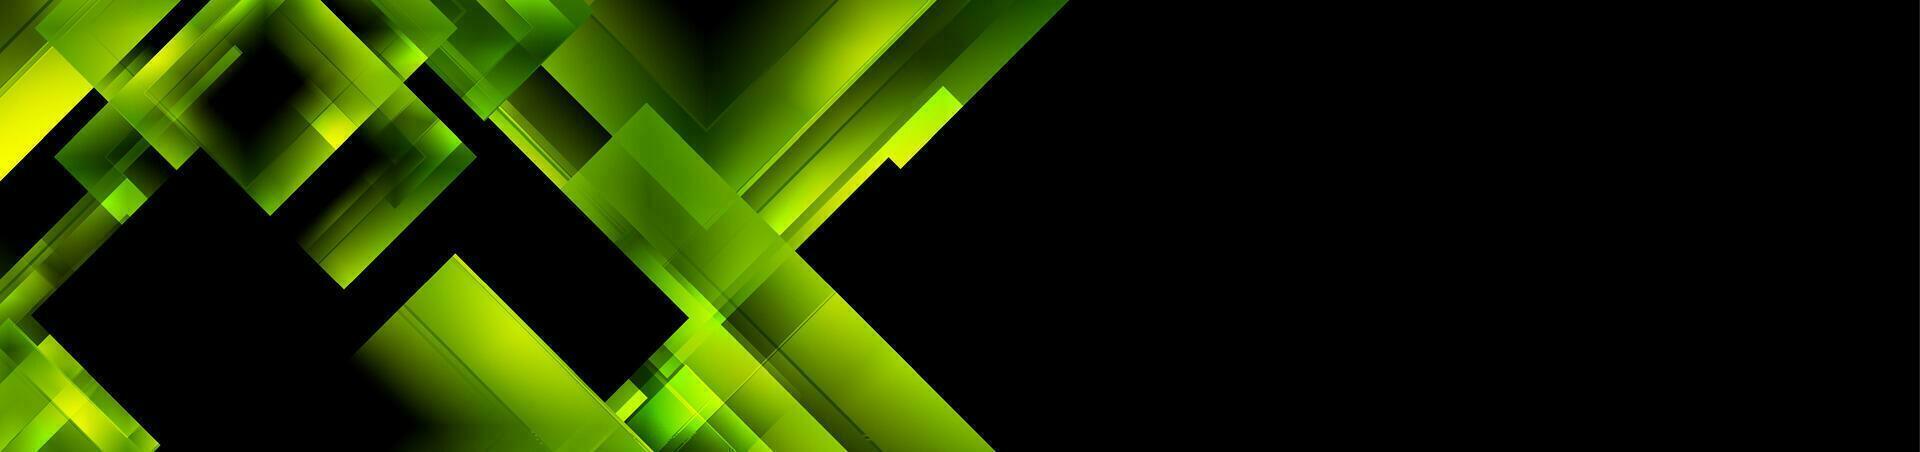 Glossy green squares abstract geometric background vector